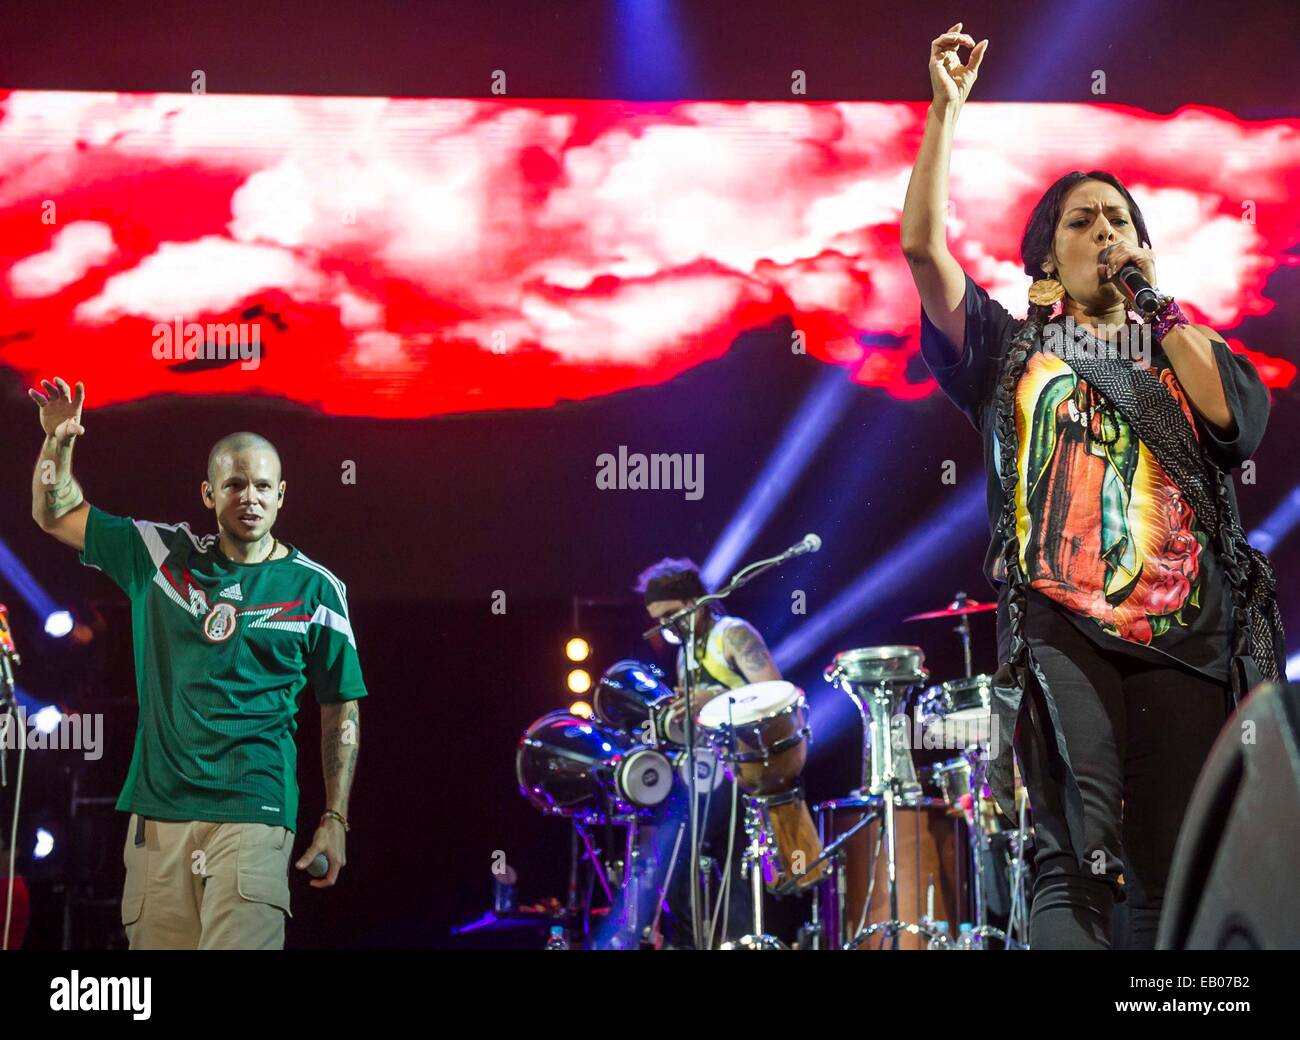 Mexico City, Mexico. 22nd Nov, 2014. Mexican singer Lila Downs (R), sings along with Puerto Rican band 'Calle 13', during a concert of 'Multiviral 2014' tour, in Mexico City, capital of Mexico, on Nov. 22, 2014. © NOTIMEX/Xinhua/Alamy Live News Stock Photo